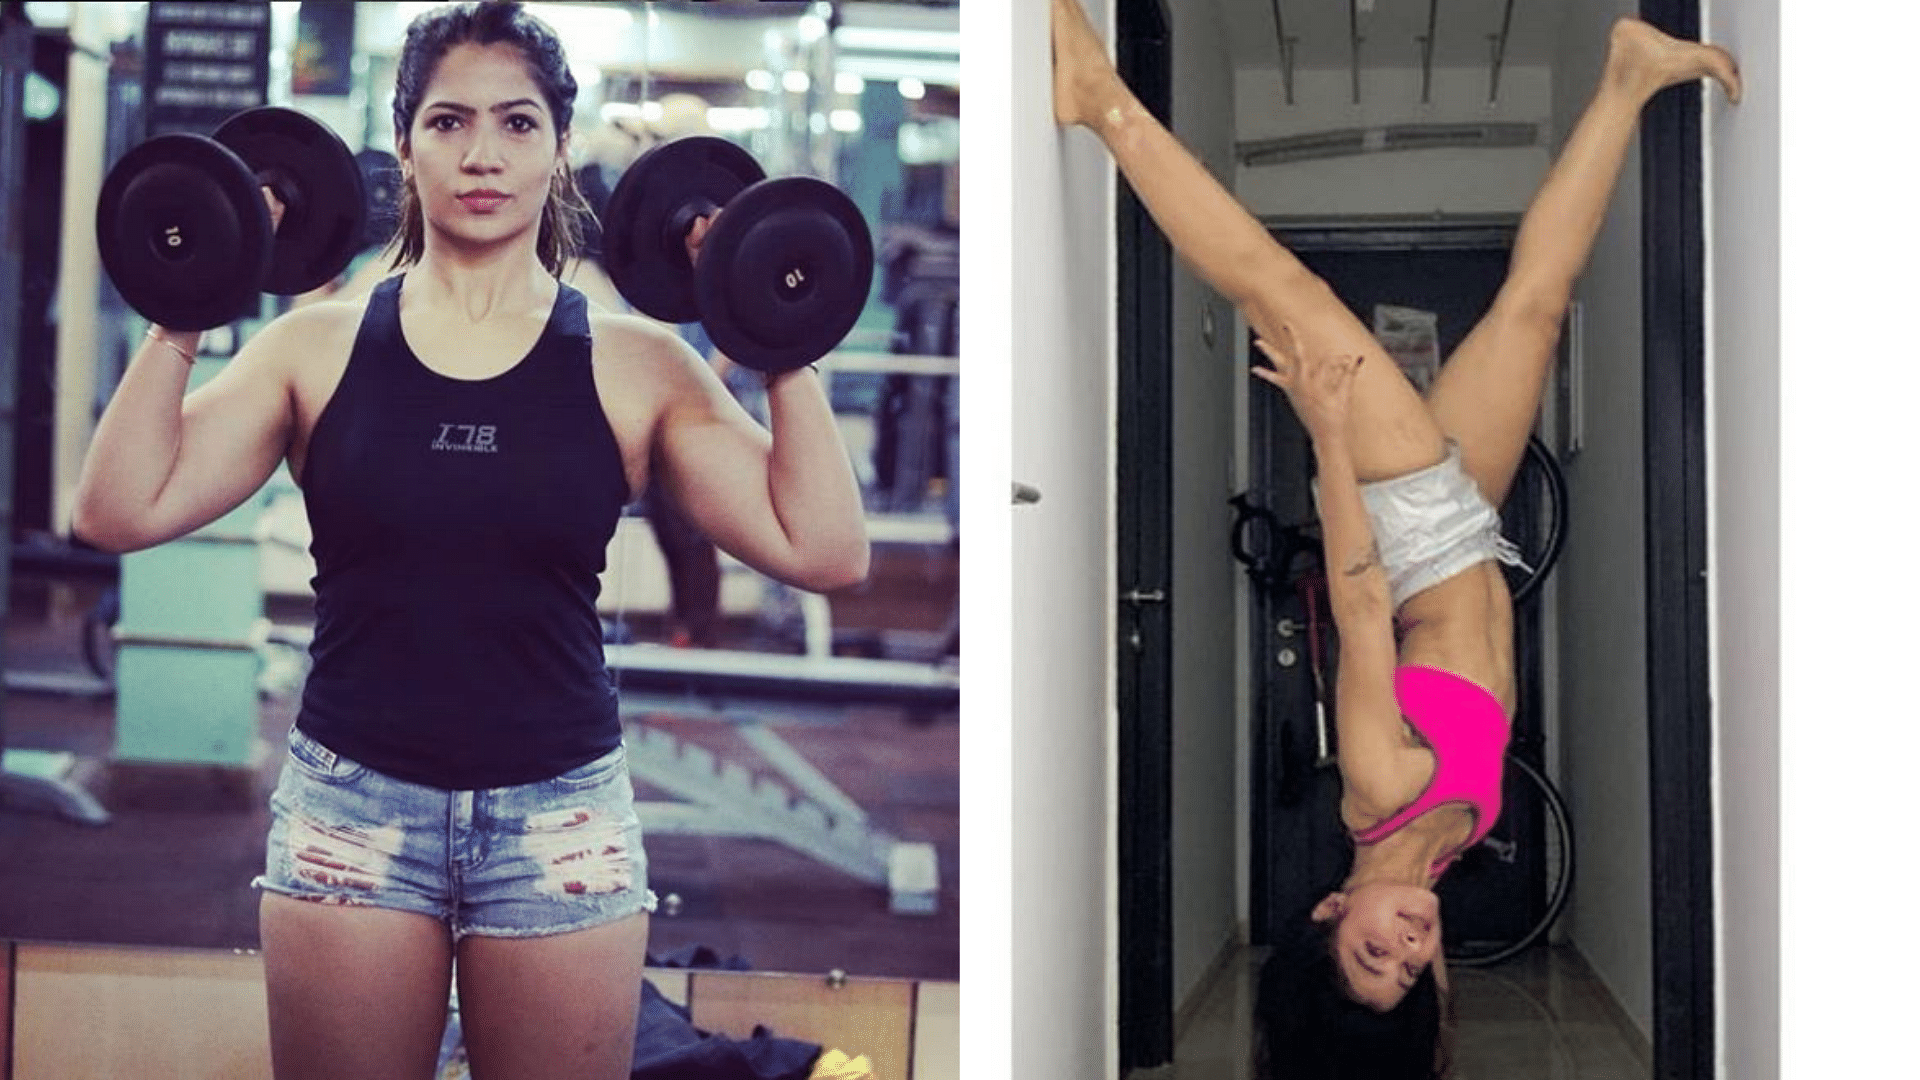 Juily (left) and Zareen (right) are fitness experts.